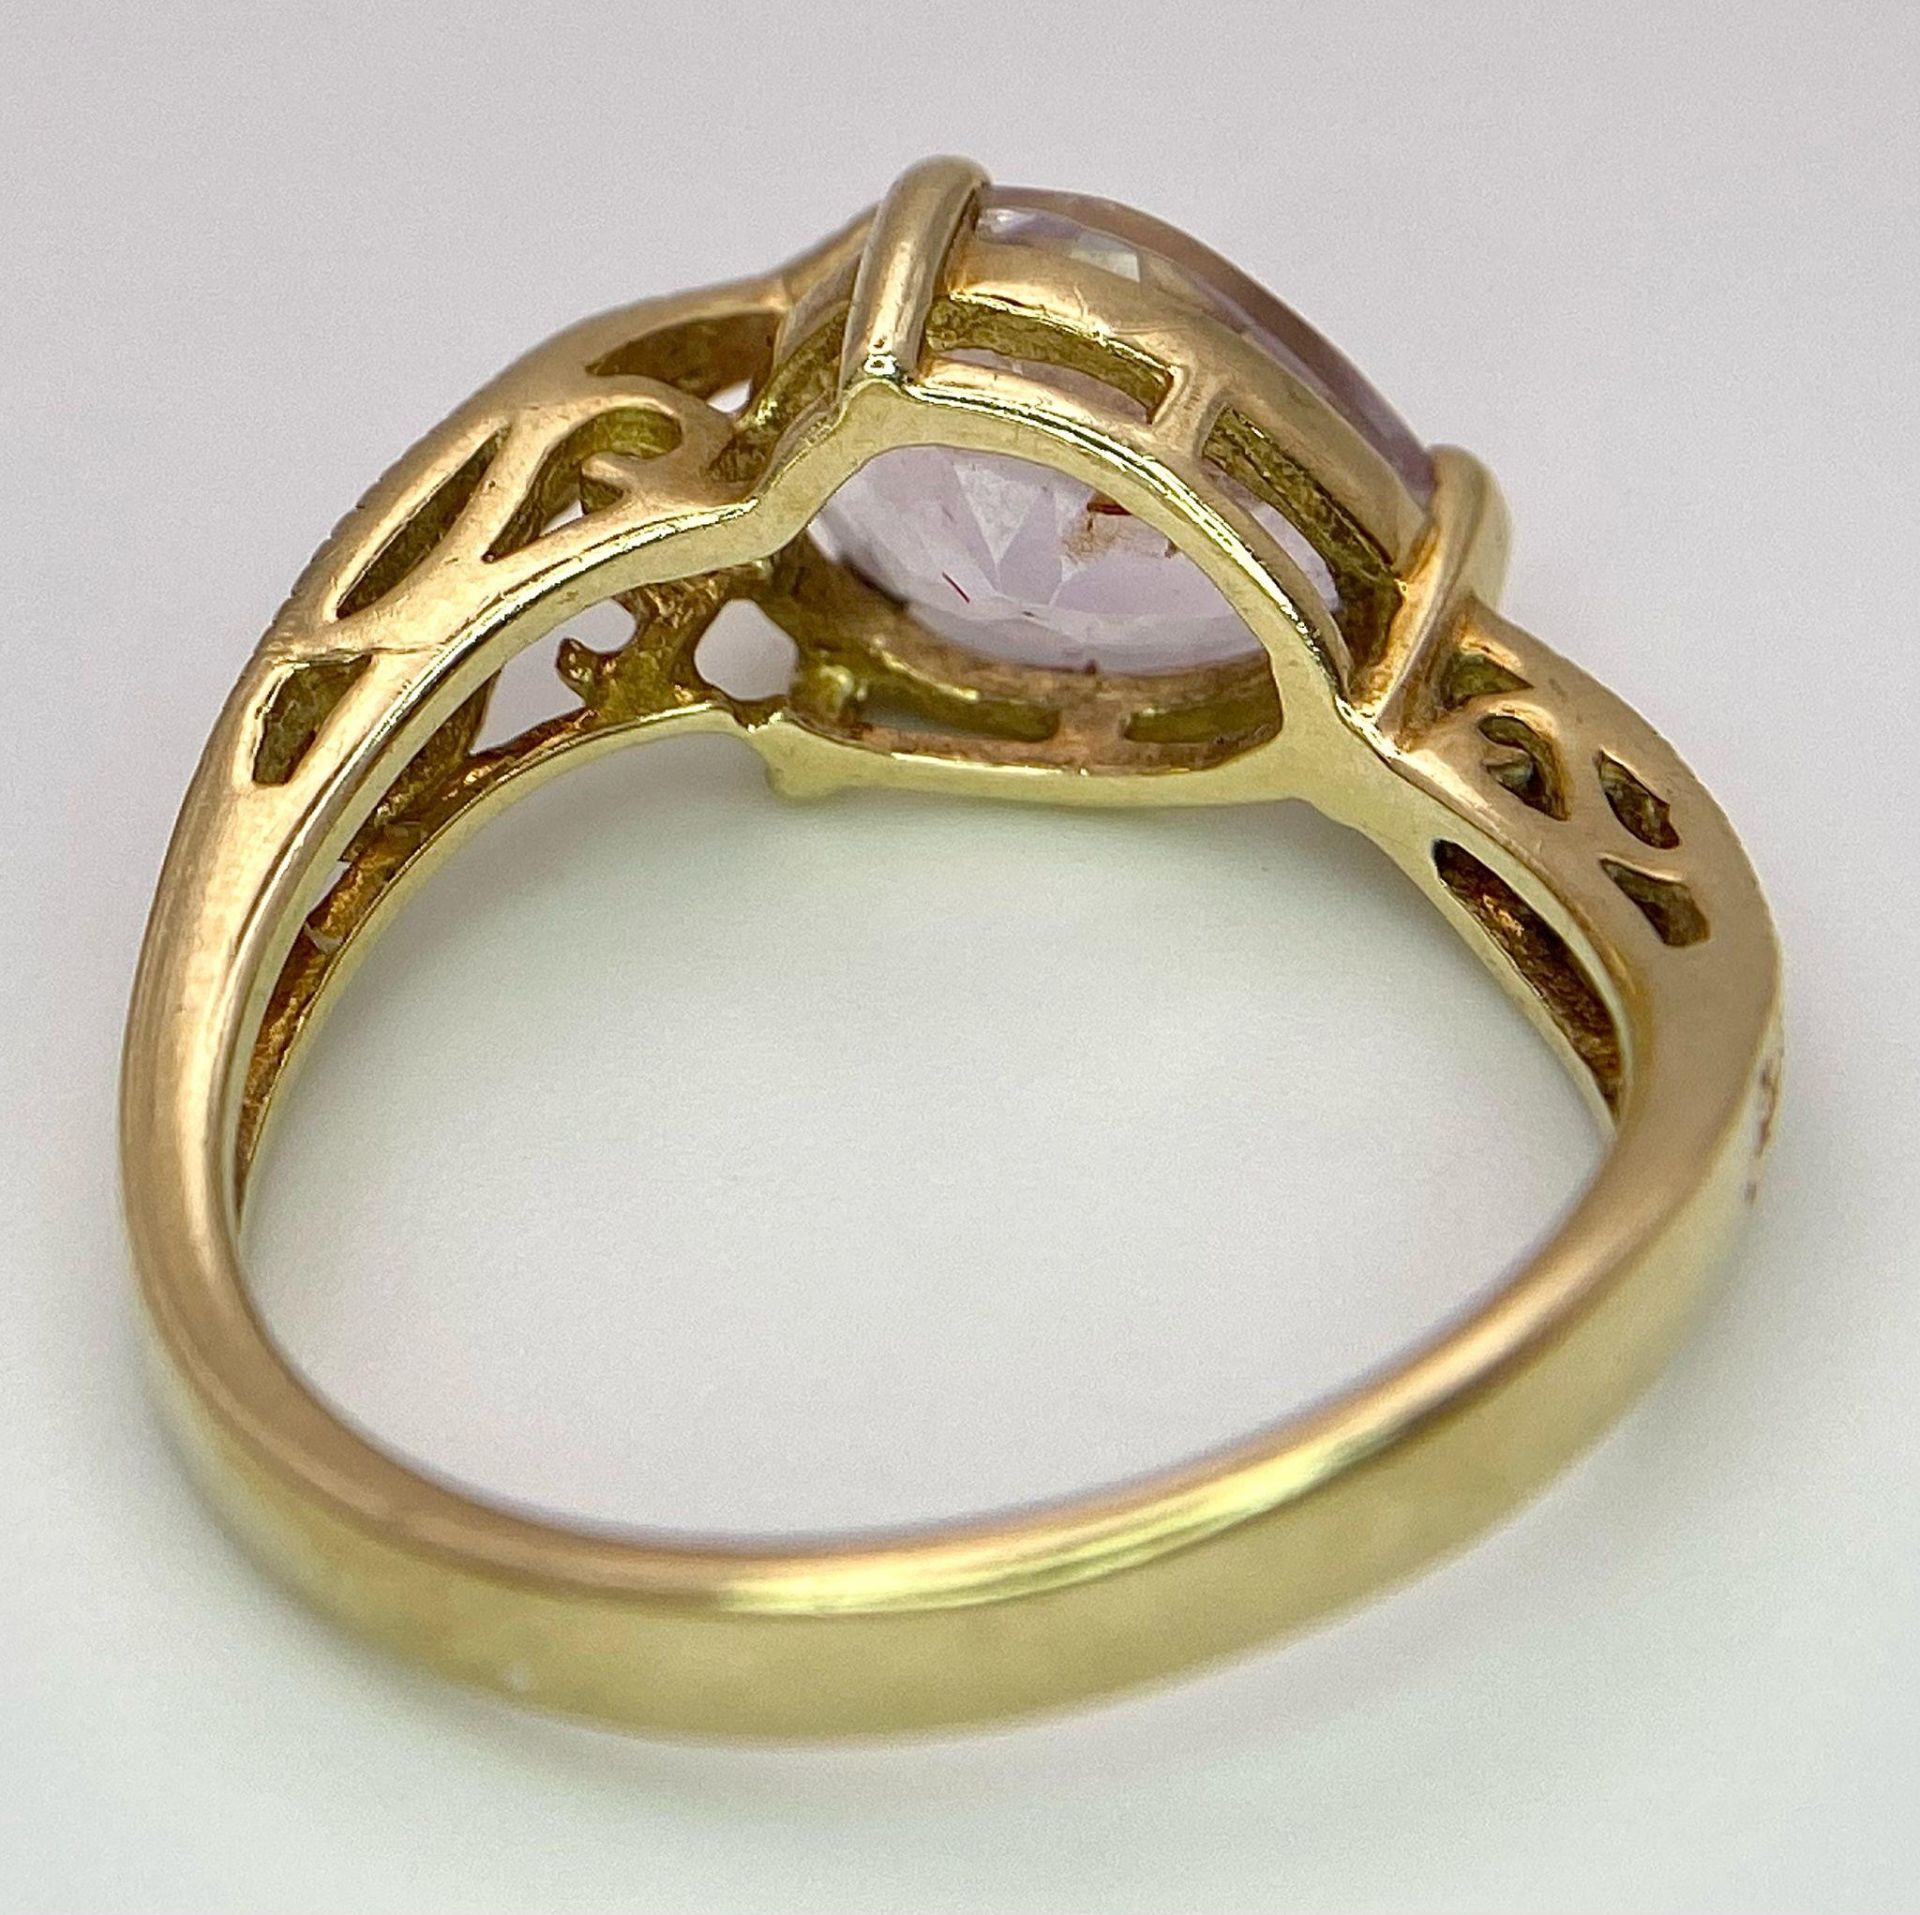 A9K GOLD SERPENT SHAPED RING WITH LARGE AMETHYST STONE . 3.7gms size O - Image 4 of 6